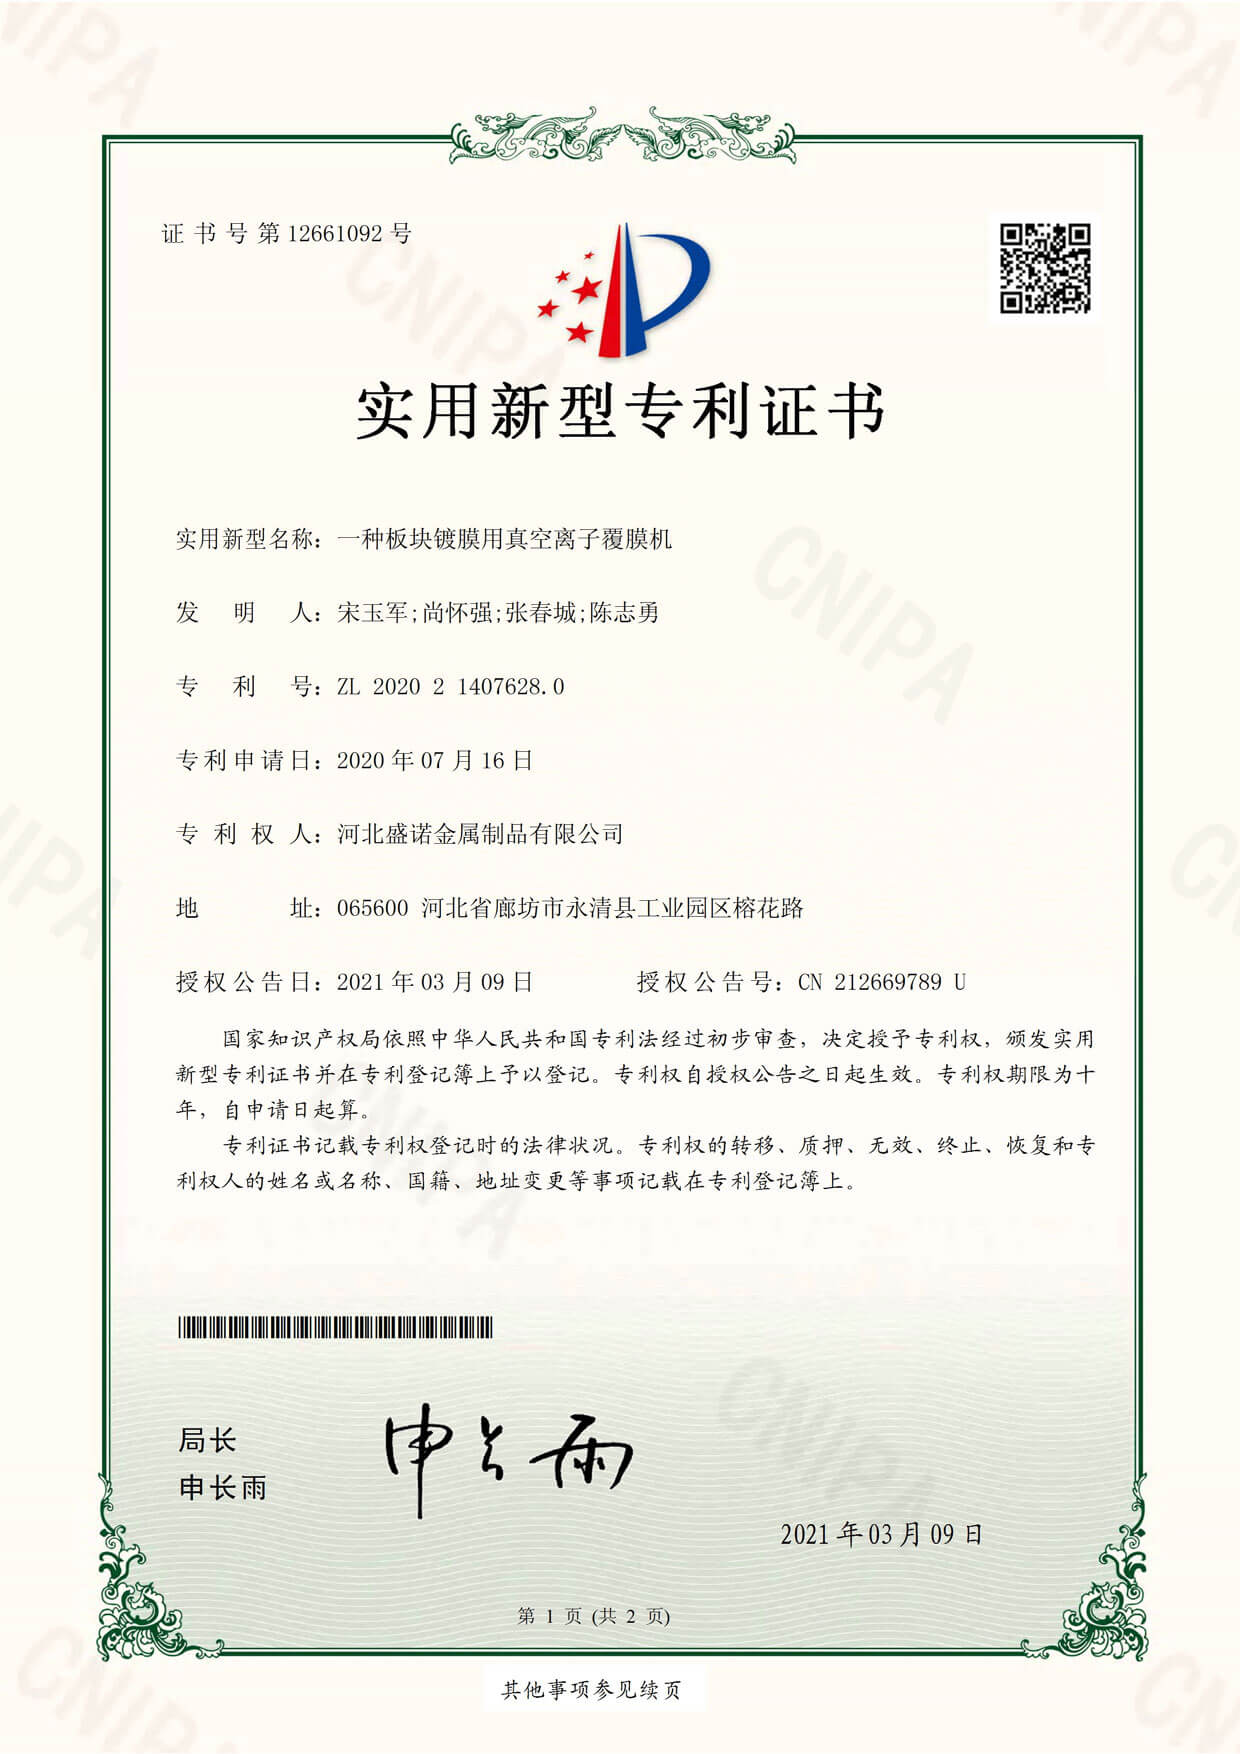 Vacuum ion coating machine for plate coating-Utility model patent certificate